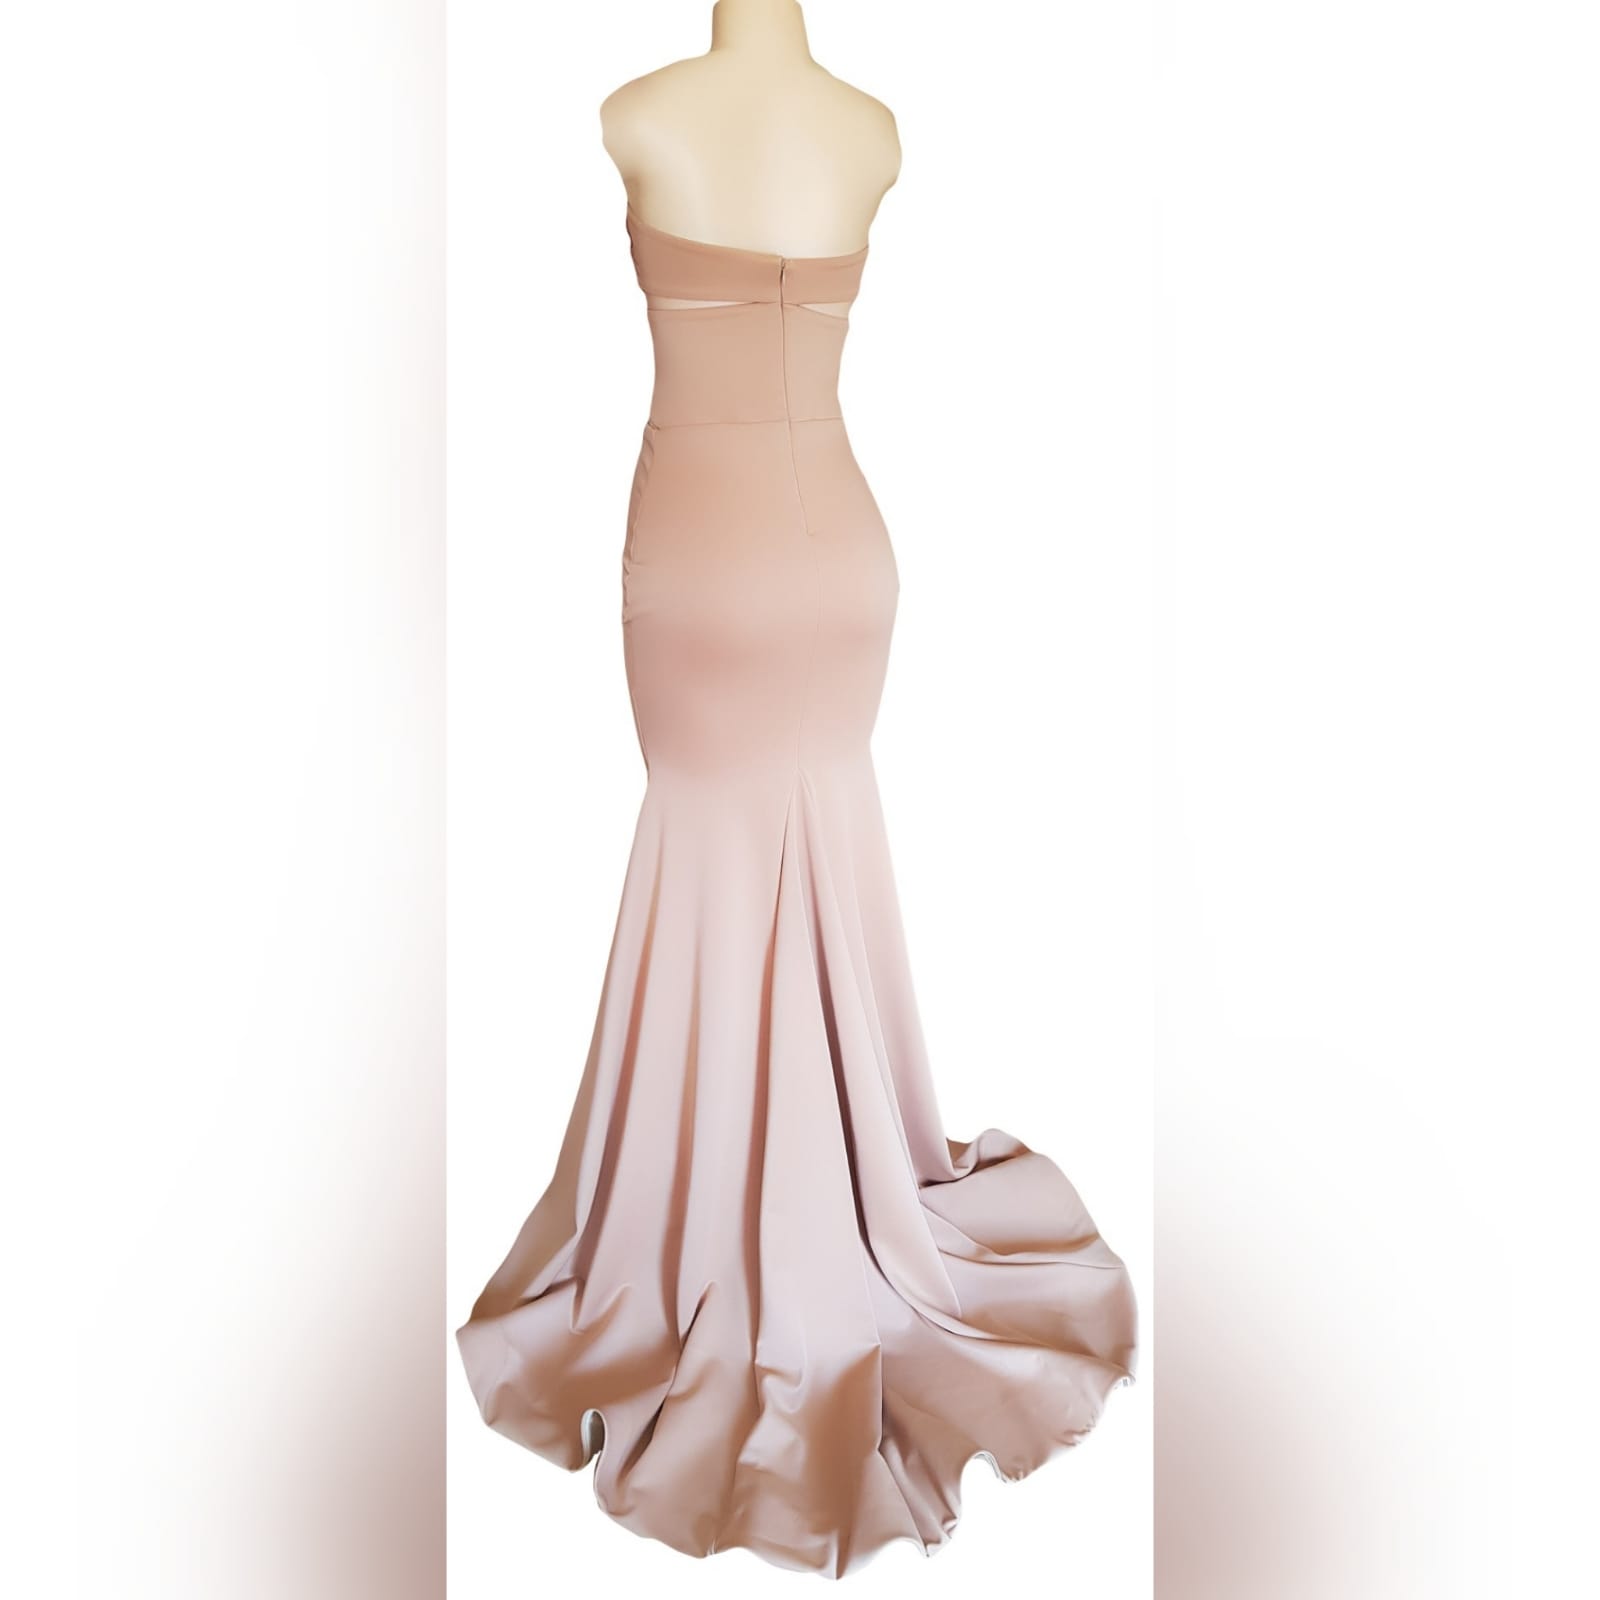 Nude mermaid boob tube prom dress 5 an evening dress designed and made to fit my client to perfection on her special occasion. Nude mermaid boob tube prom dress. With a sweetheart neckline, crossed bust design, and a wide train.